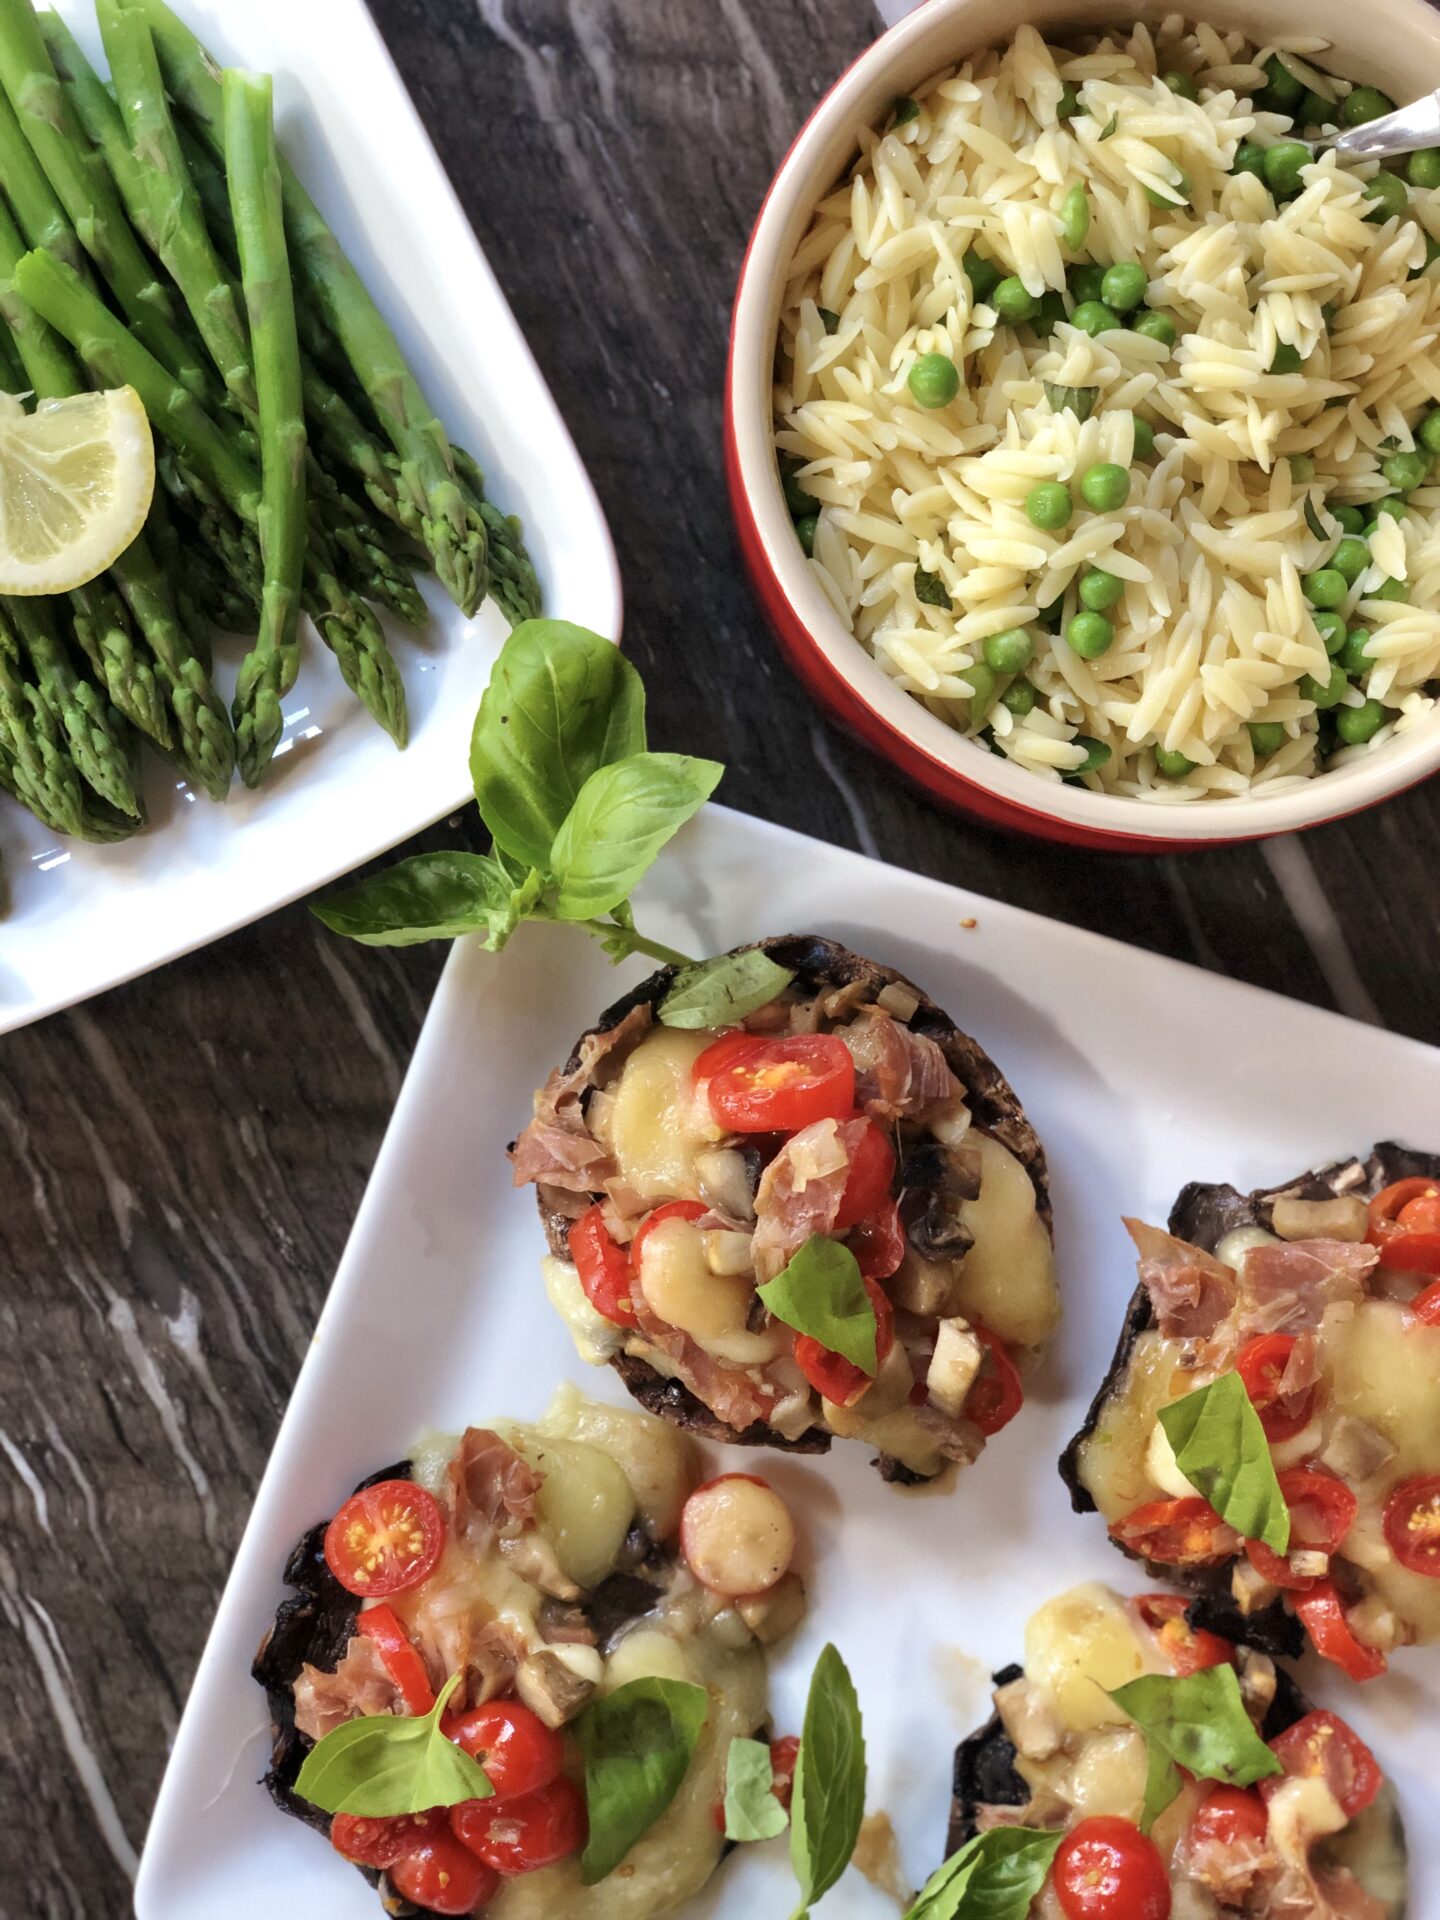 Bowls and platters of stuffed mushrooms, orzo pasta and asparagus